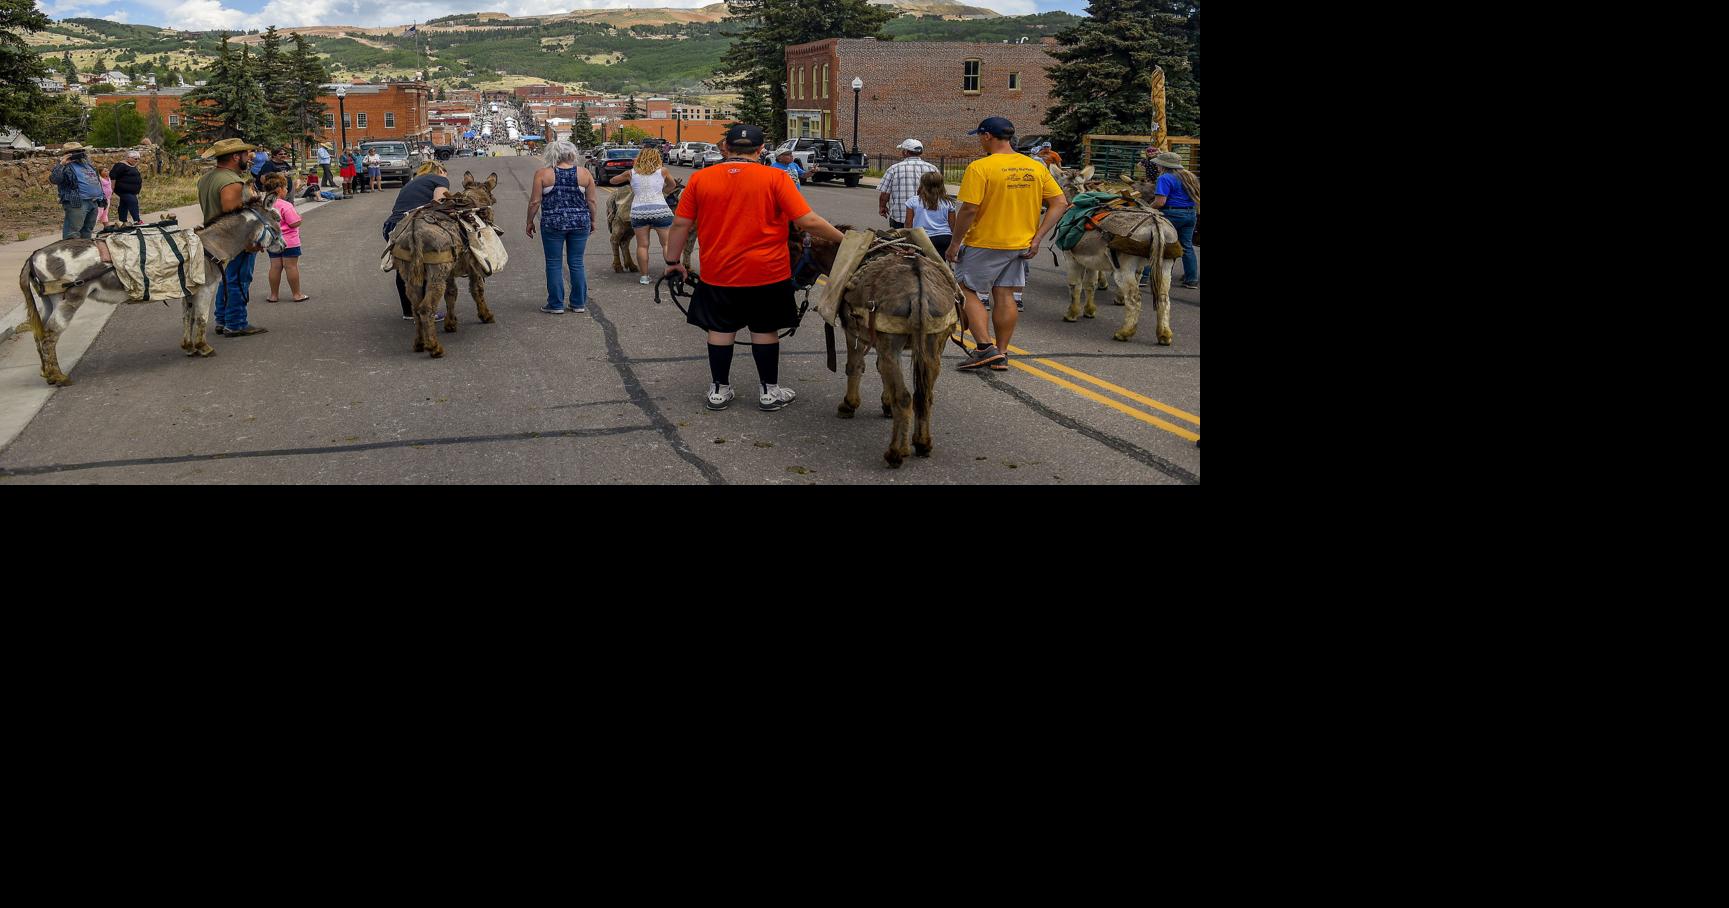 Cripple Creek pays homage to historic roots with 87th Donkey Derby Days